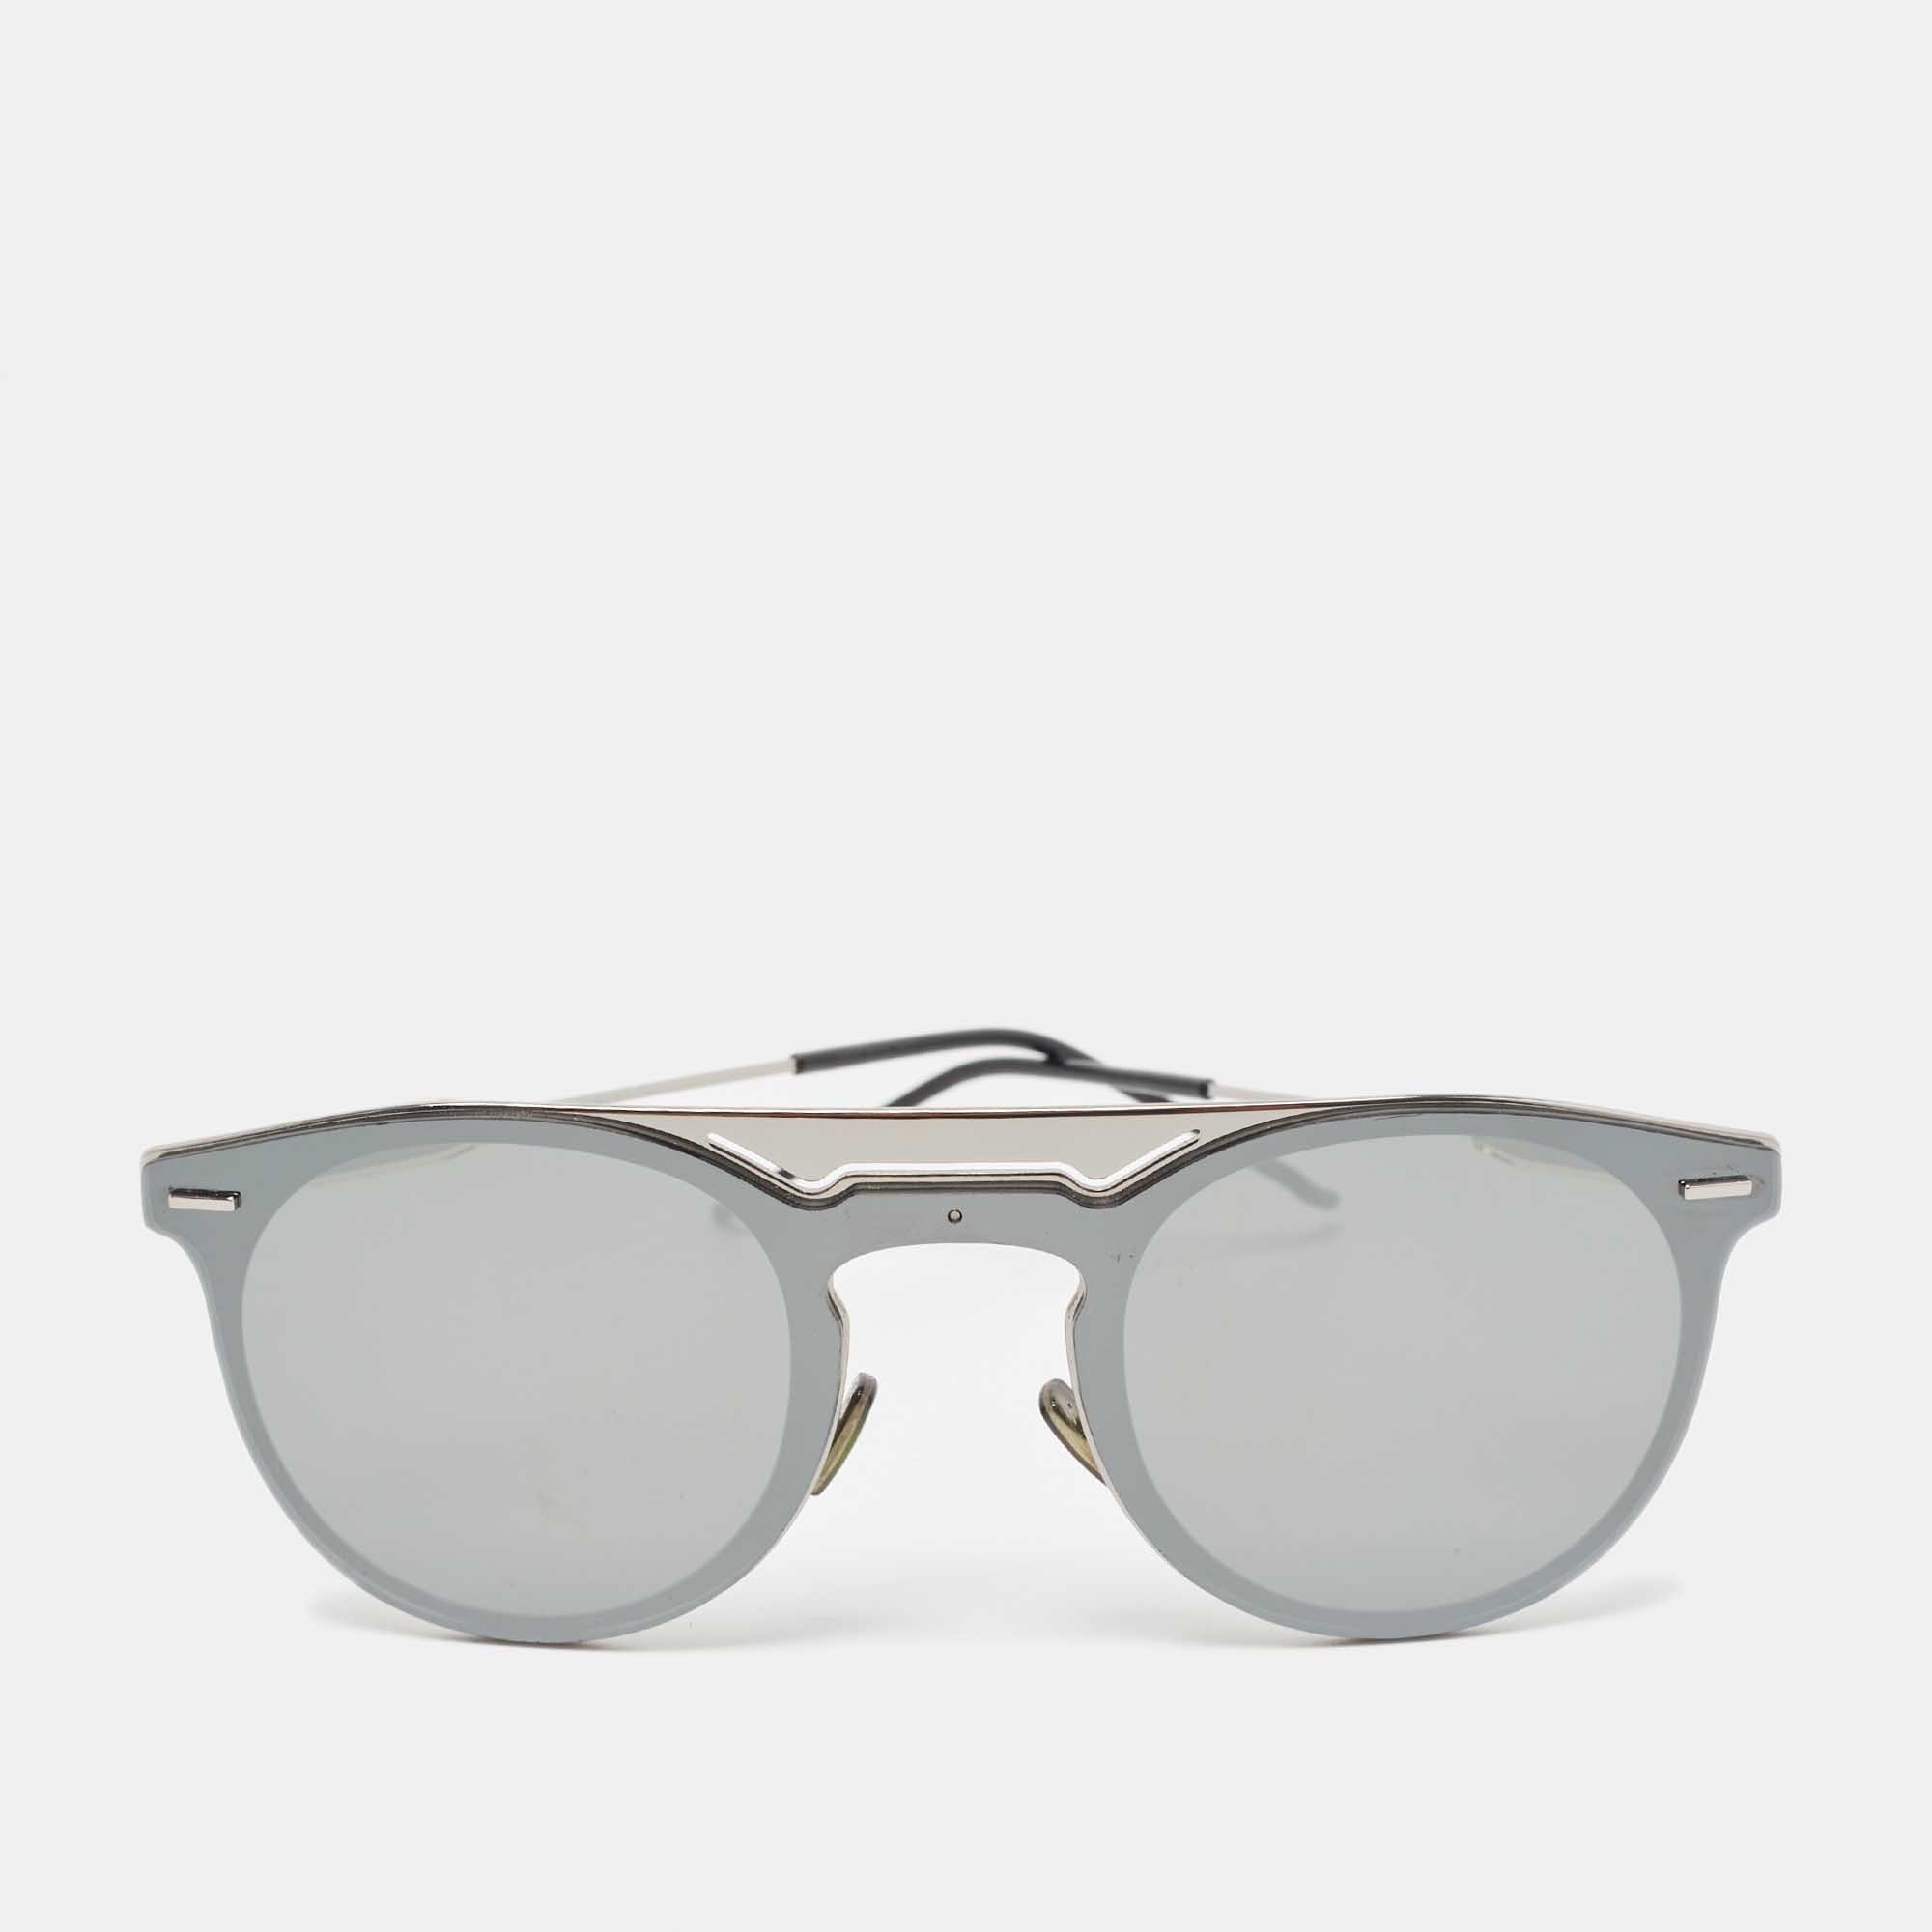 Pre-owned Dior Homme Grey Mirrored 0211s Round Sunglasses